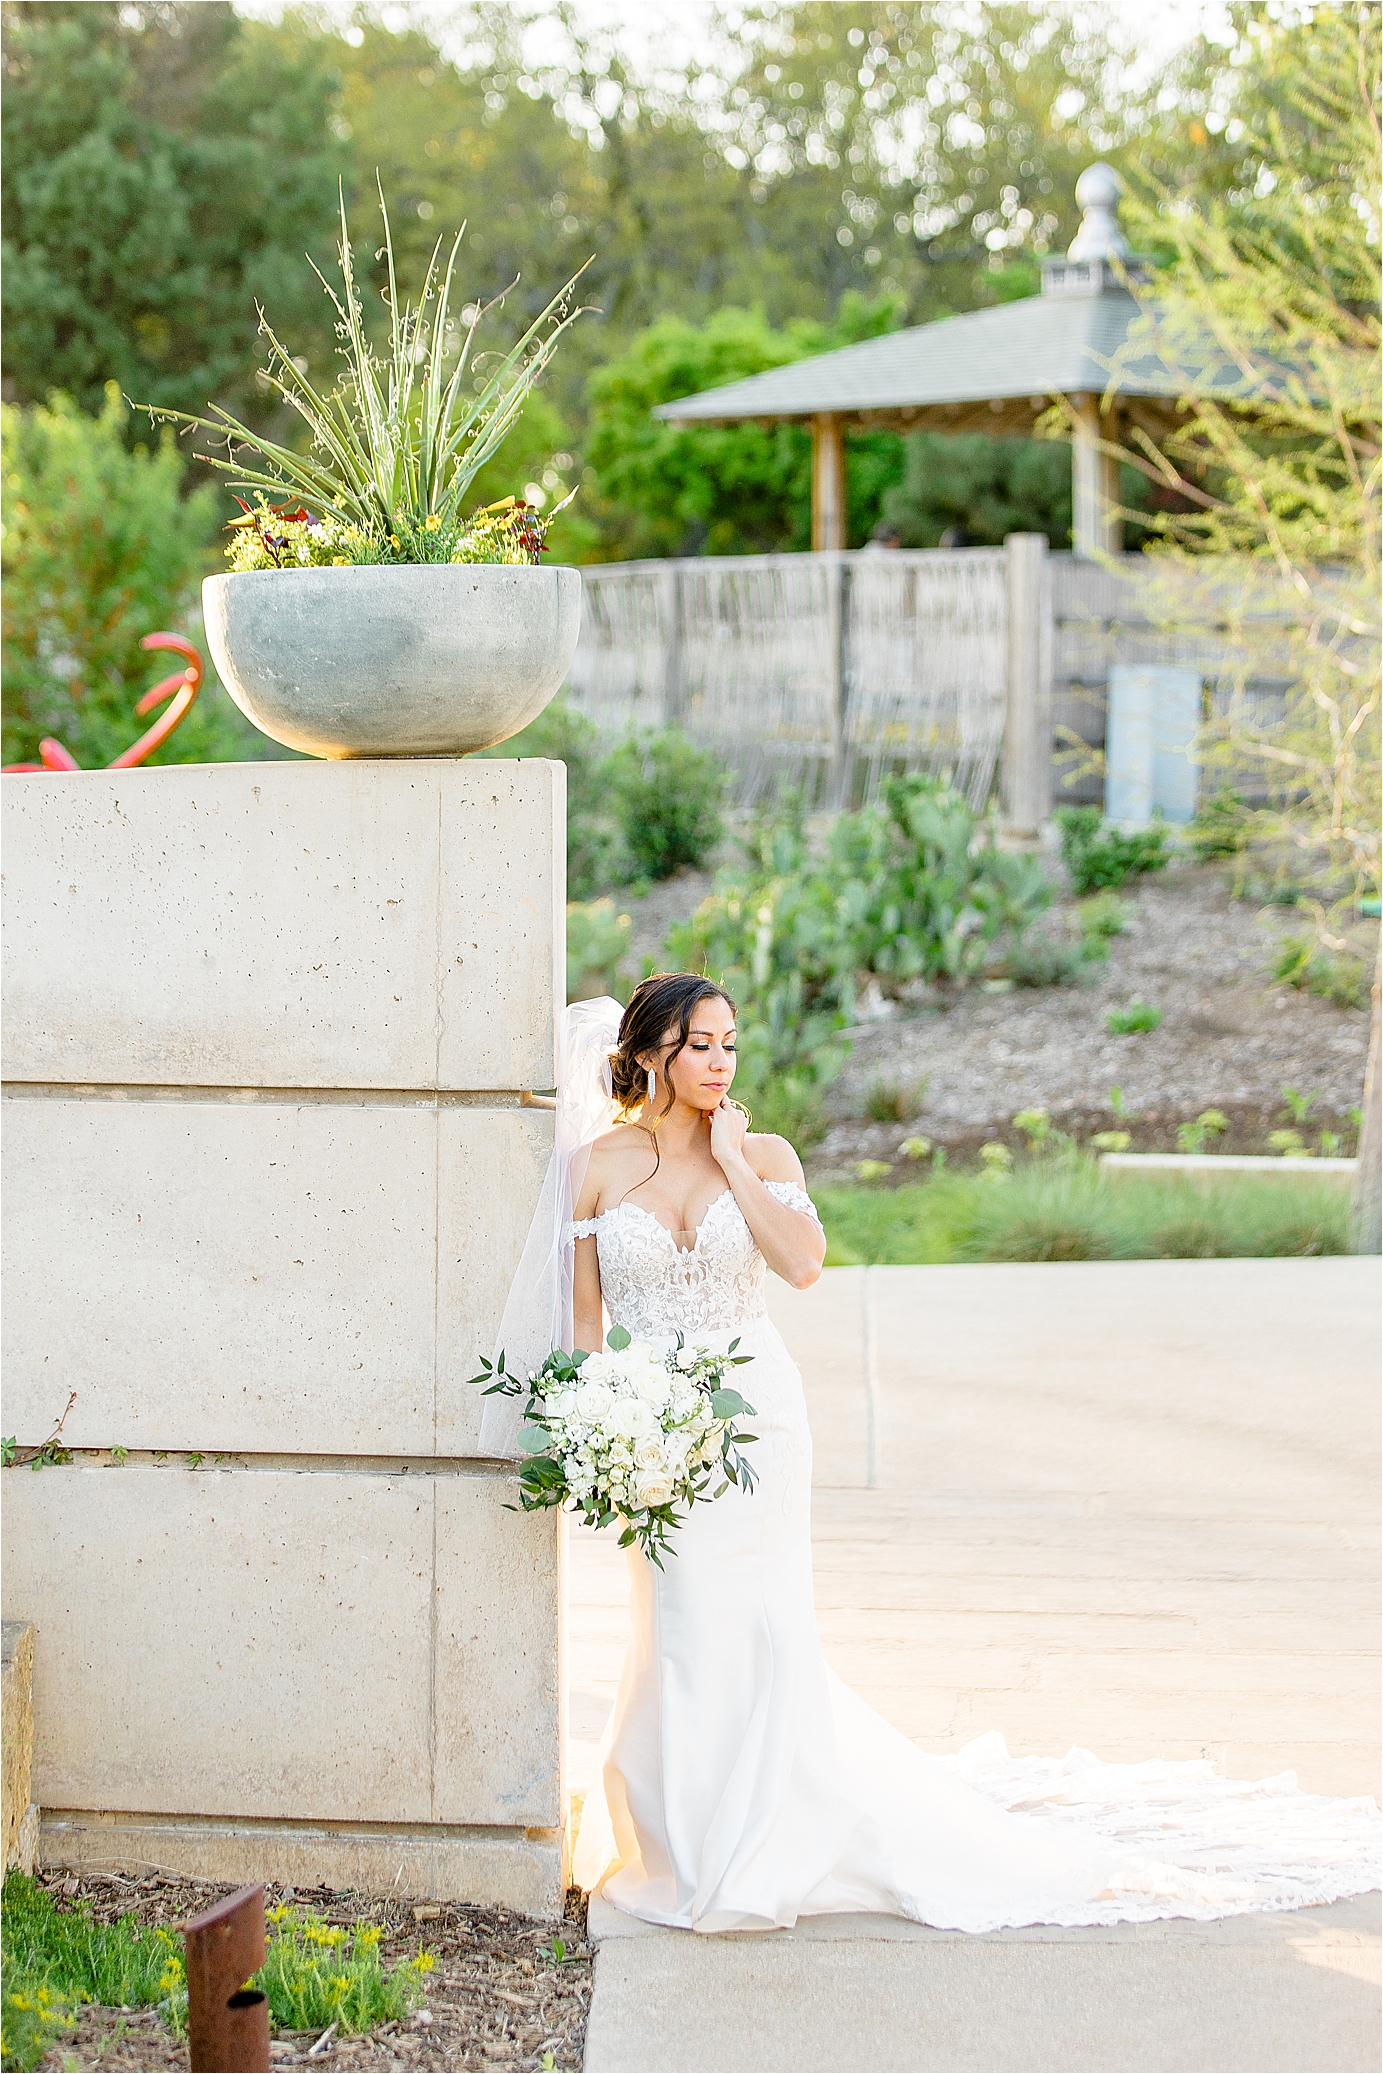 A bride poses leaning on a wall surrounded by greenery at San Antonio Botanic Garden during her bridal Session with Jillian Hogan Photography